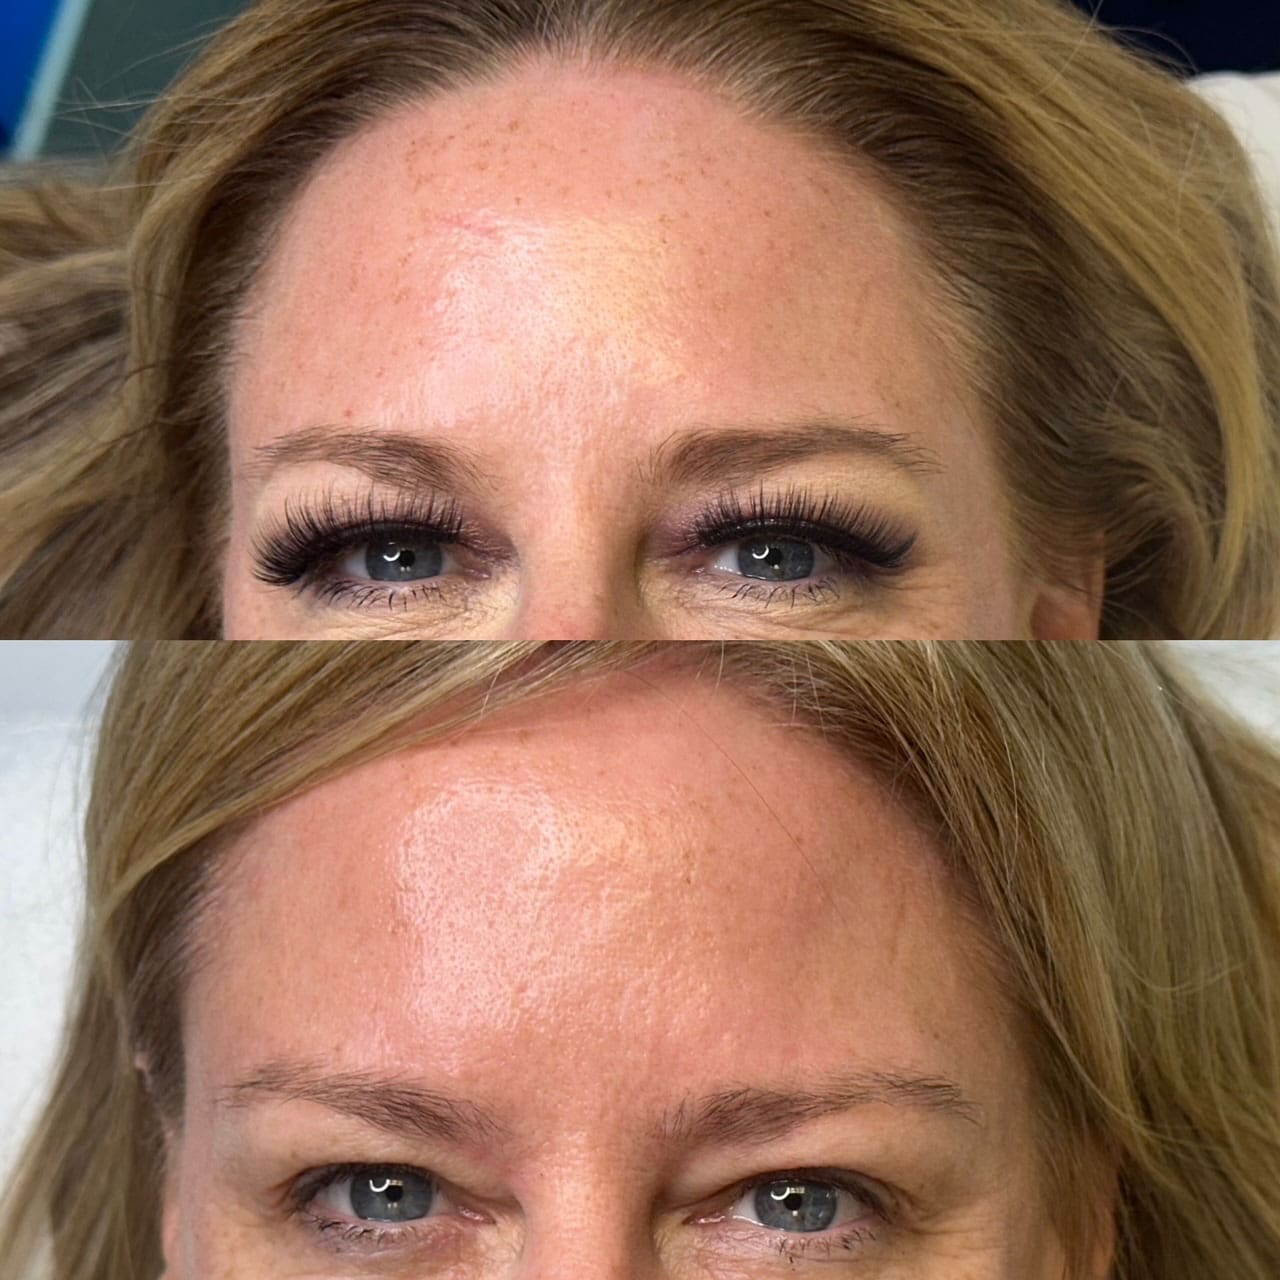 Patient before and after BioRePeel, front closeup view of forehead